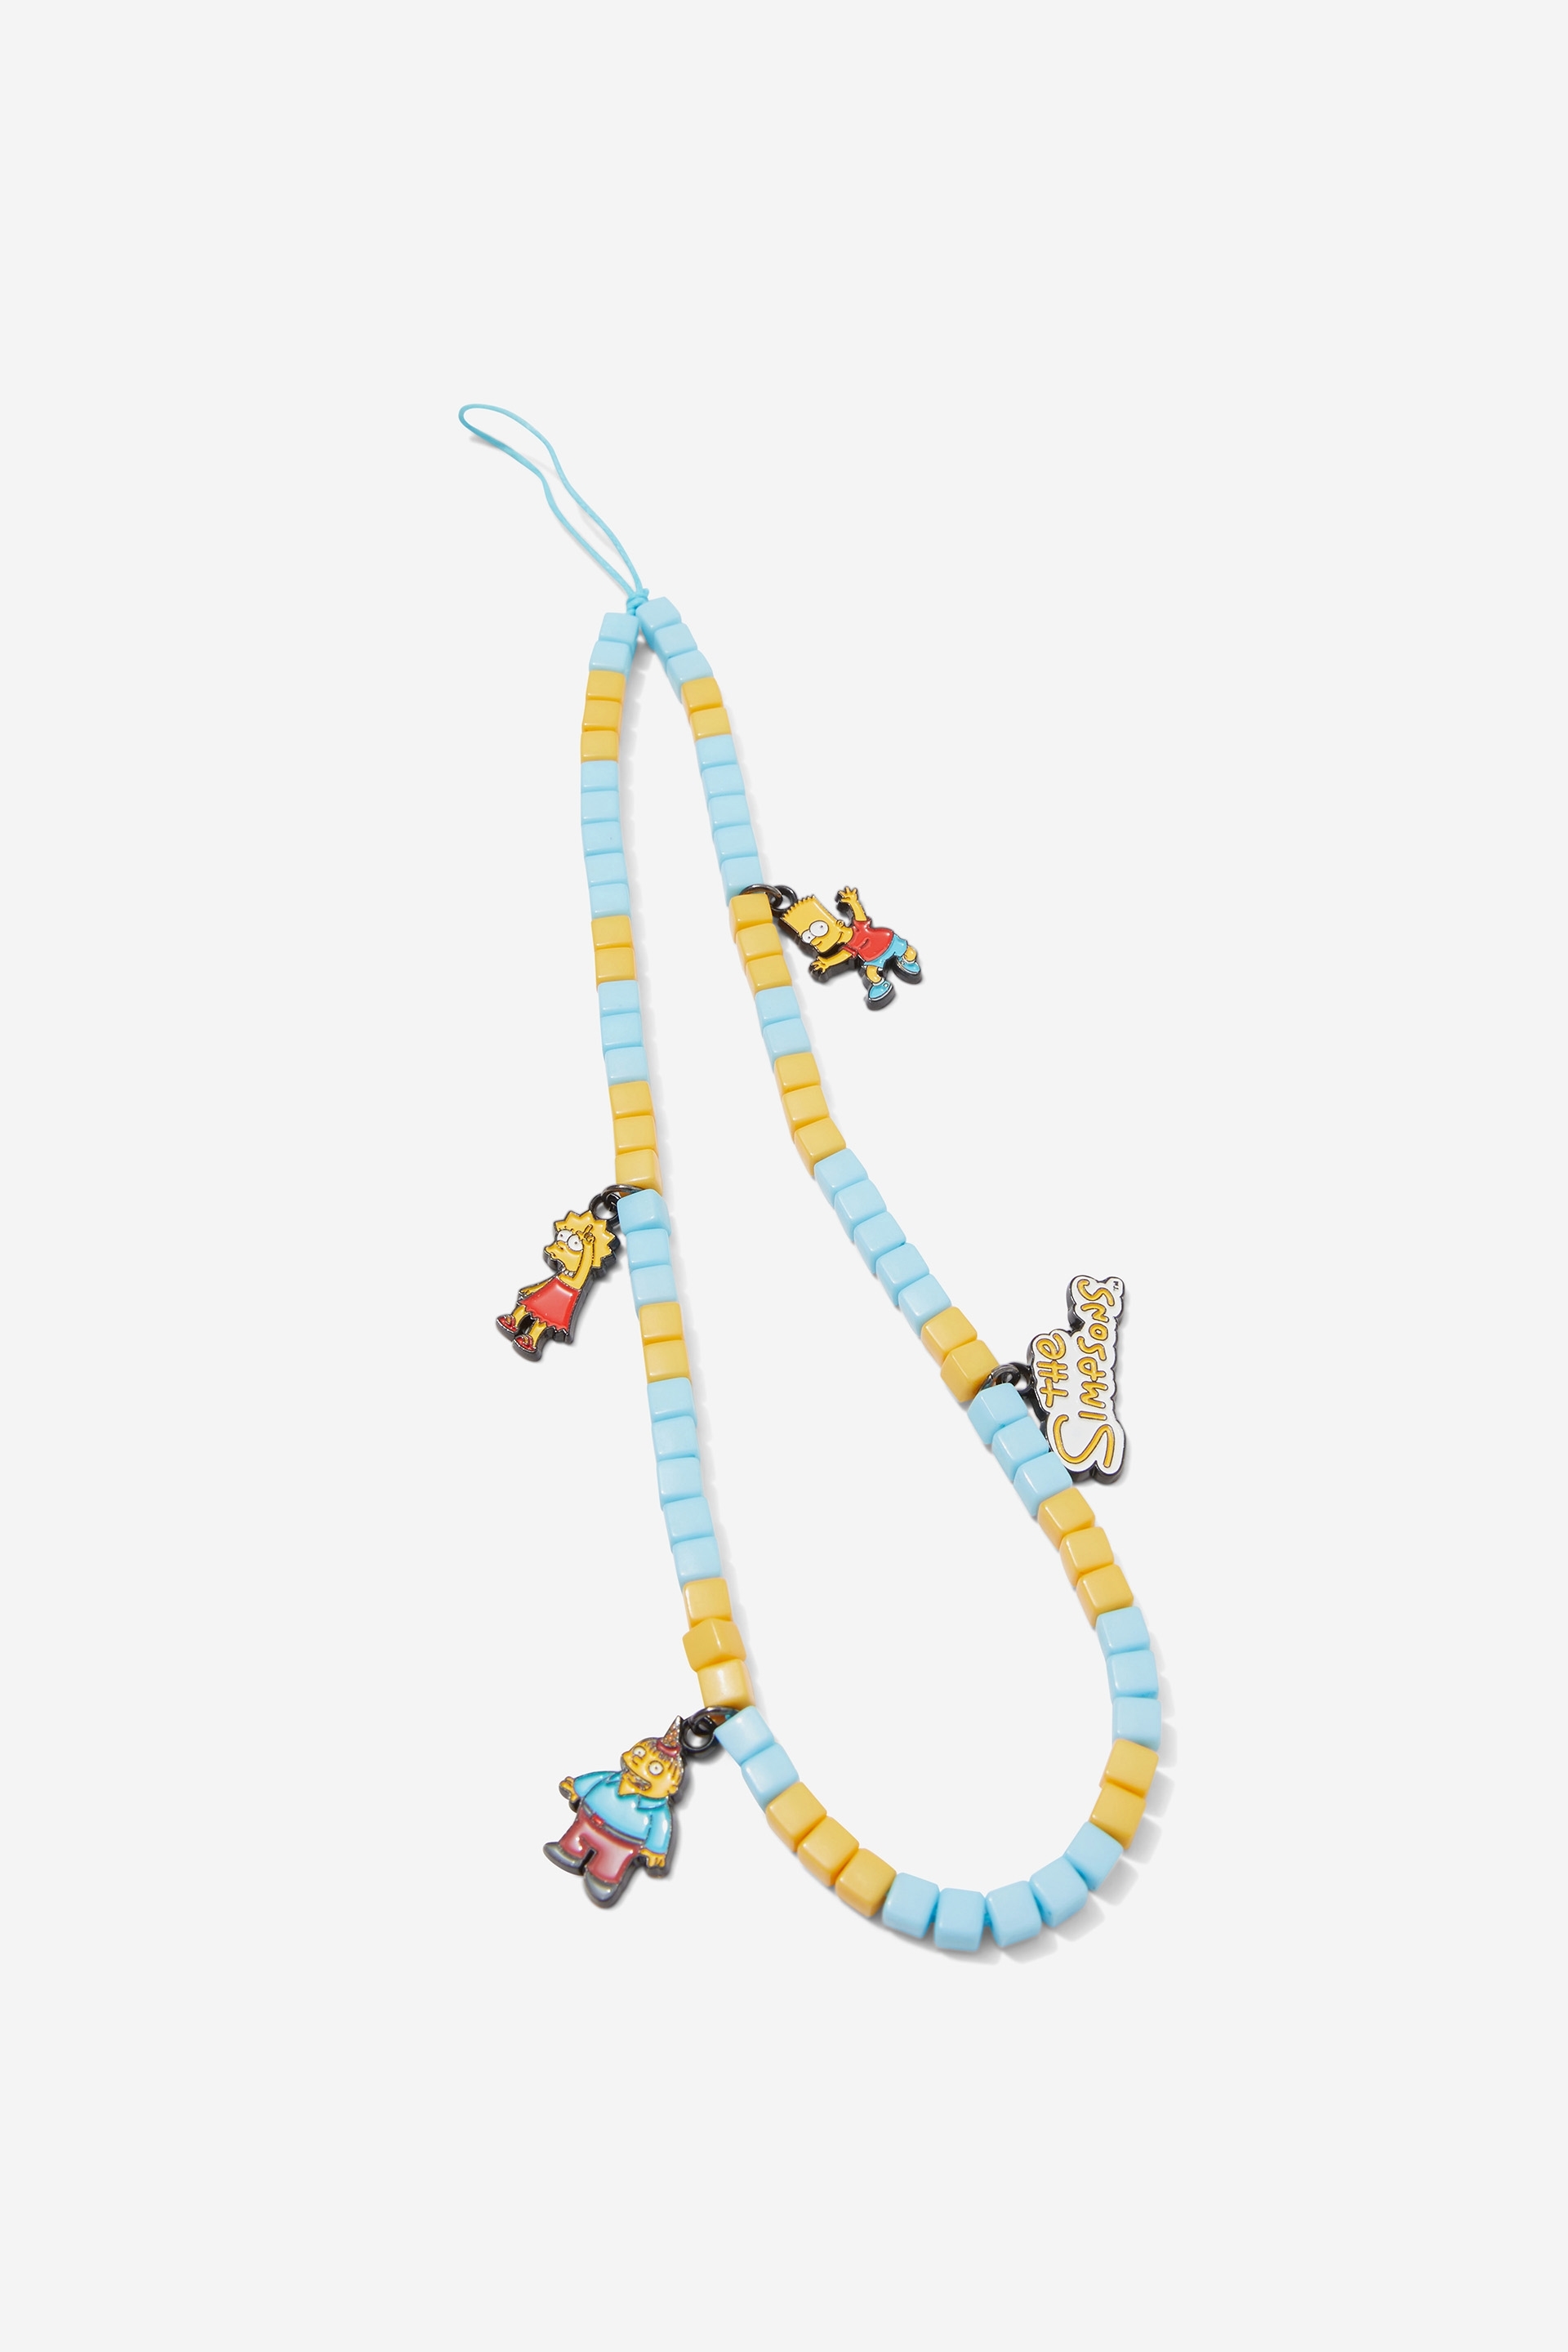 Typo - The Simpsons Carried Away Phone Charm Strap - Lcn sim/the simpsons